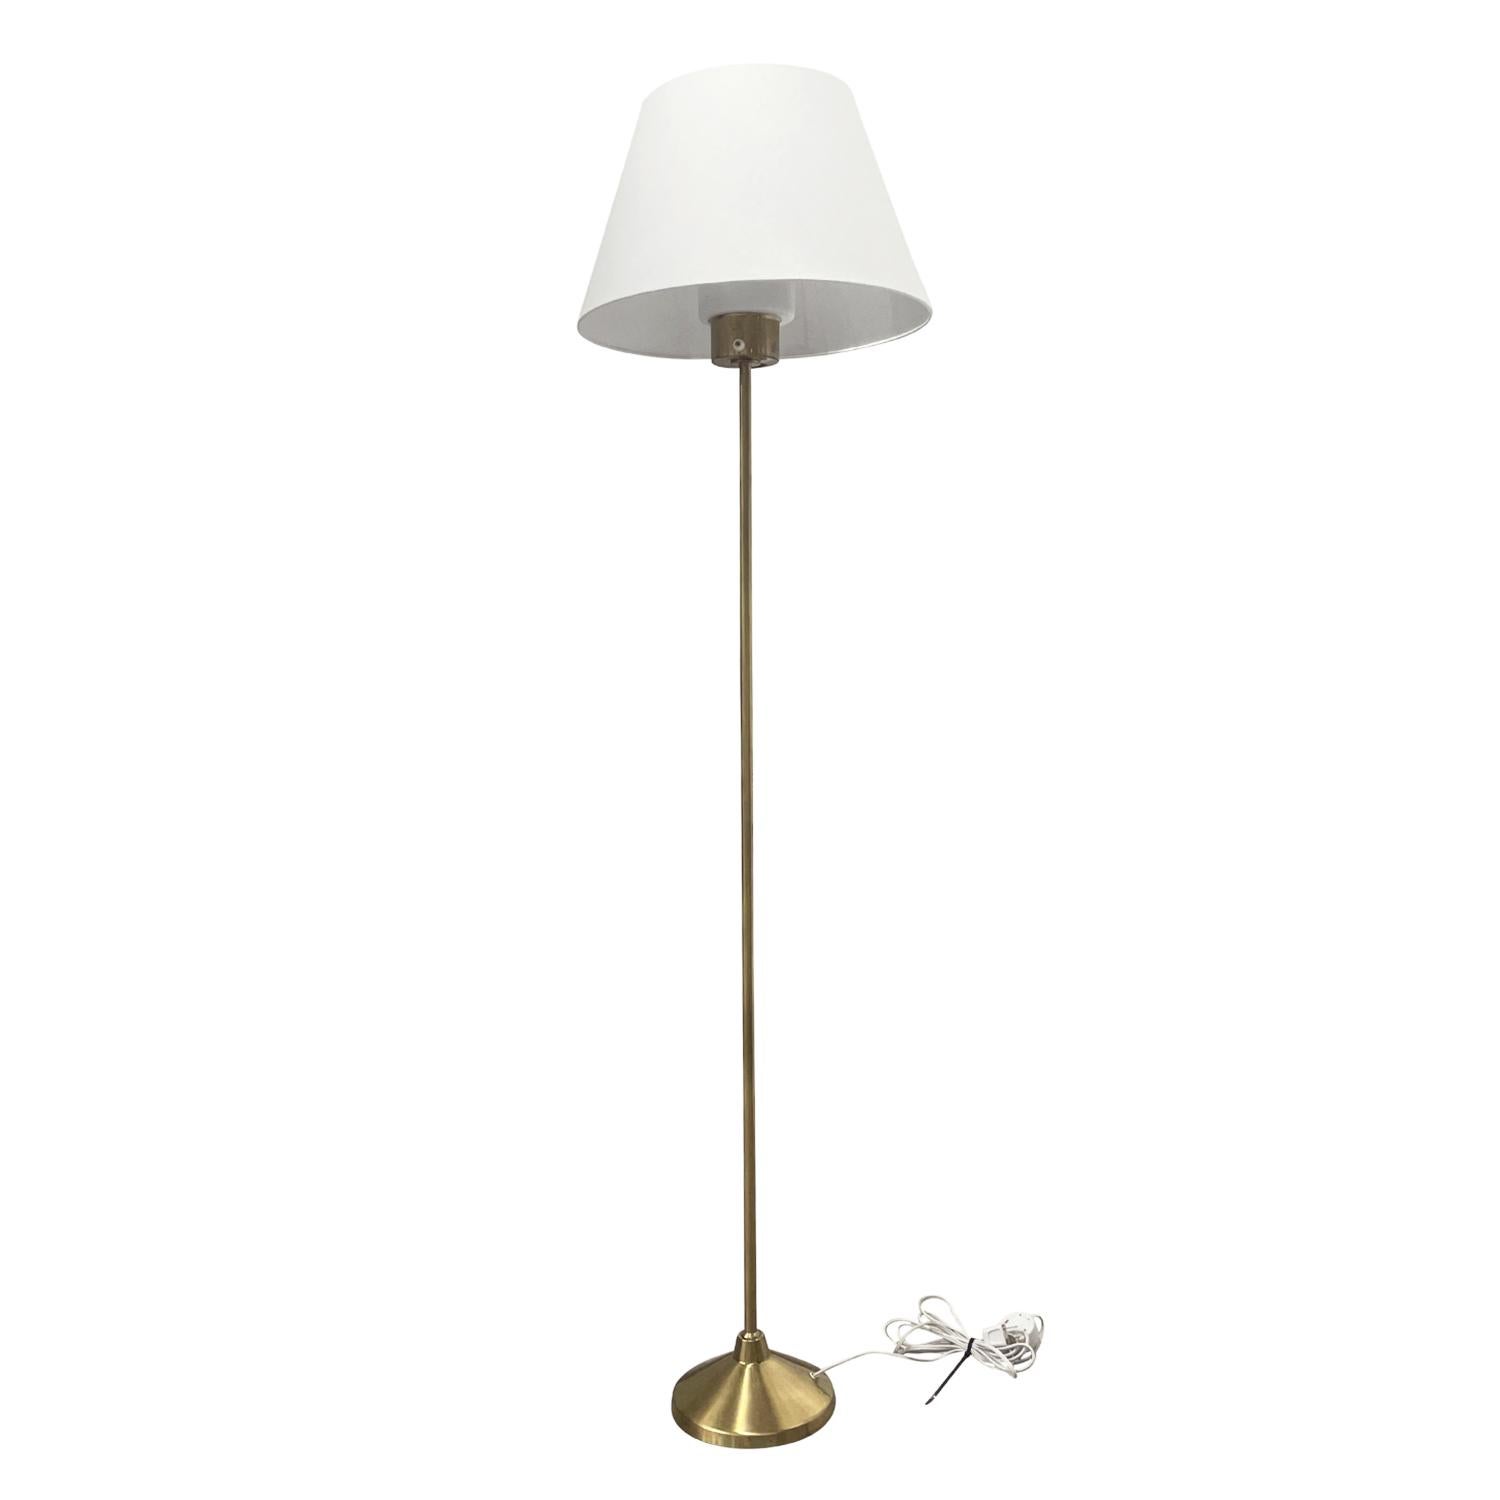 An antique Art Deco Swedish Golvlampa, floor lamp with a new white round shade, made of handcrafted polished brass, designed by Hans-Agne Jakobsson and produced by AB Markaryd in good condition. The Scandinavian reading light is composed with a hand